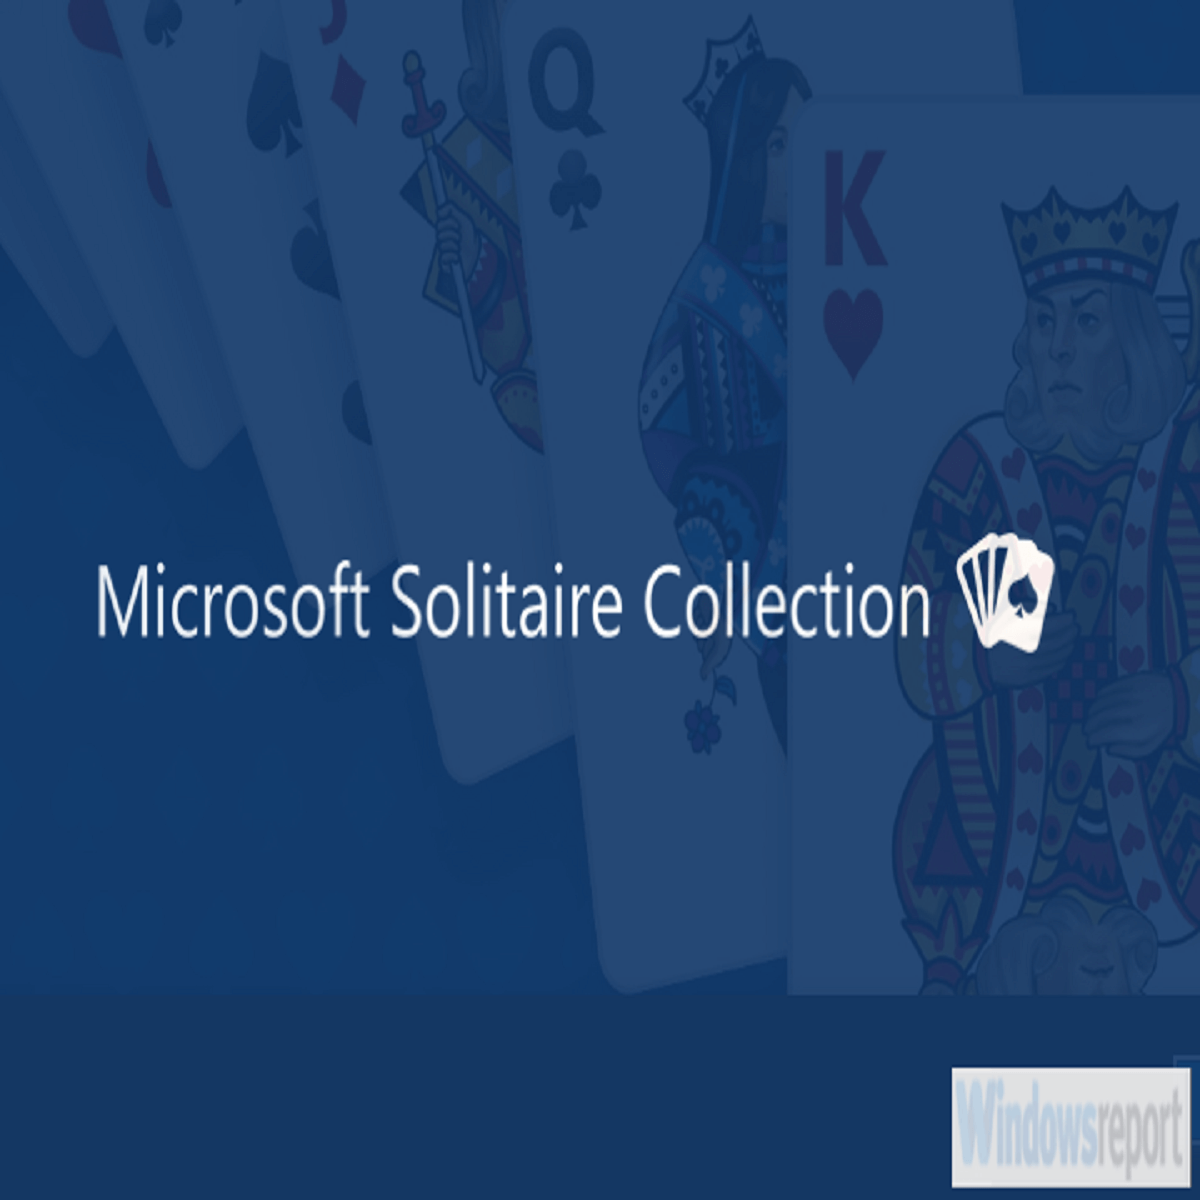 how can i reset my microsoft solitaire collection windows 10